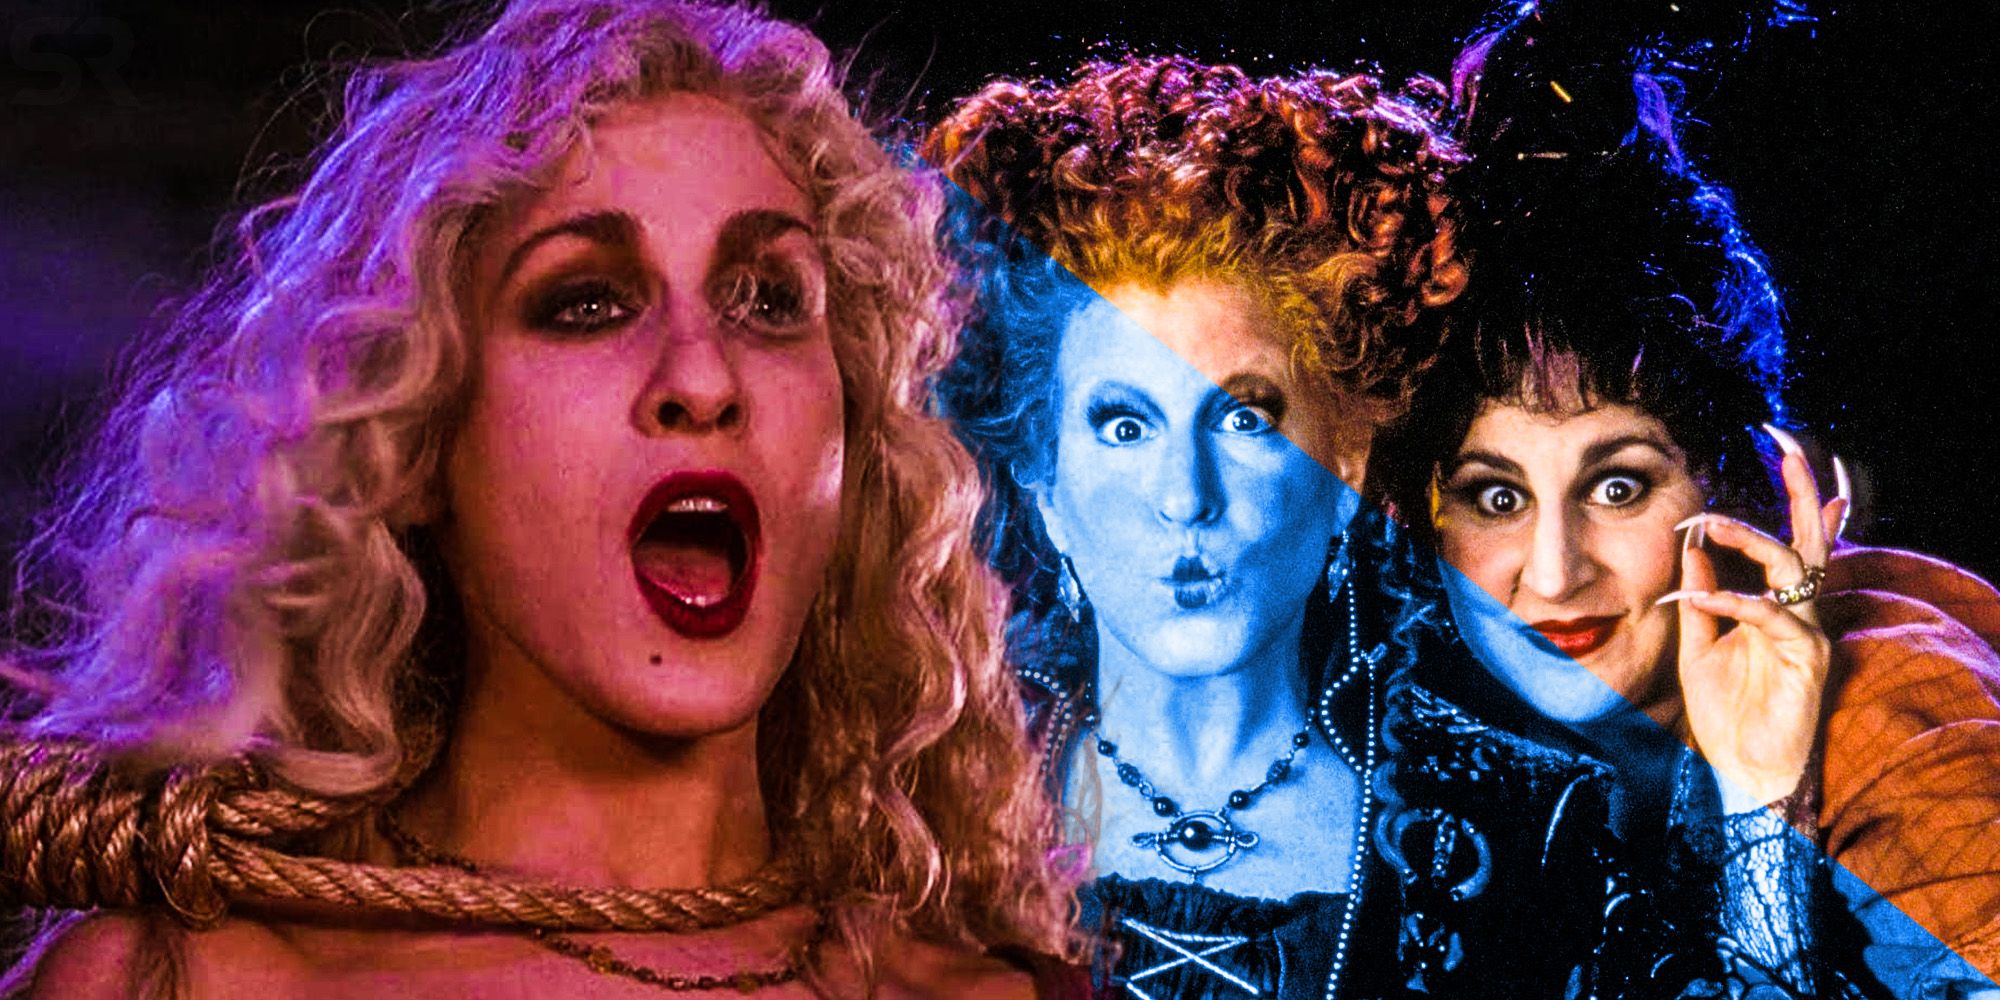 Hocus pocus 2 how the Sanderson witches can return sarah jessica parker